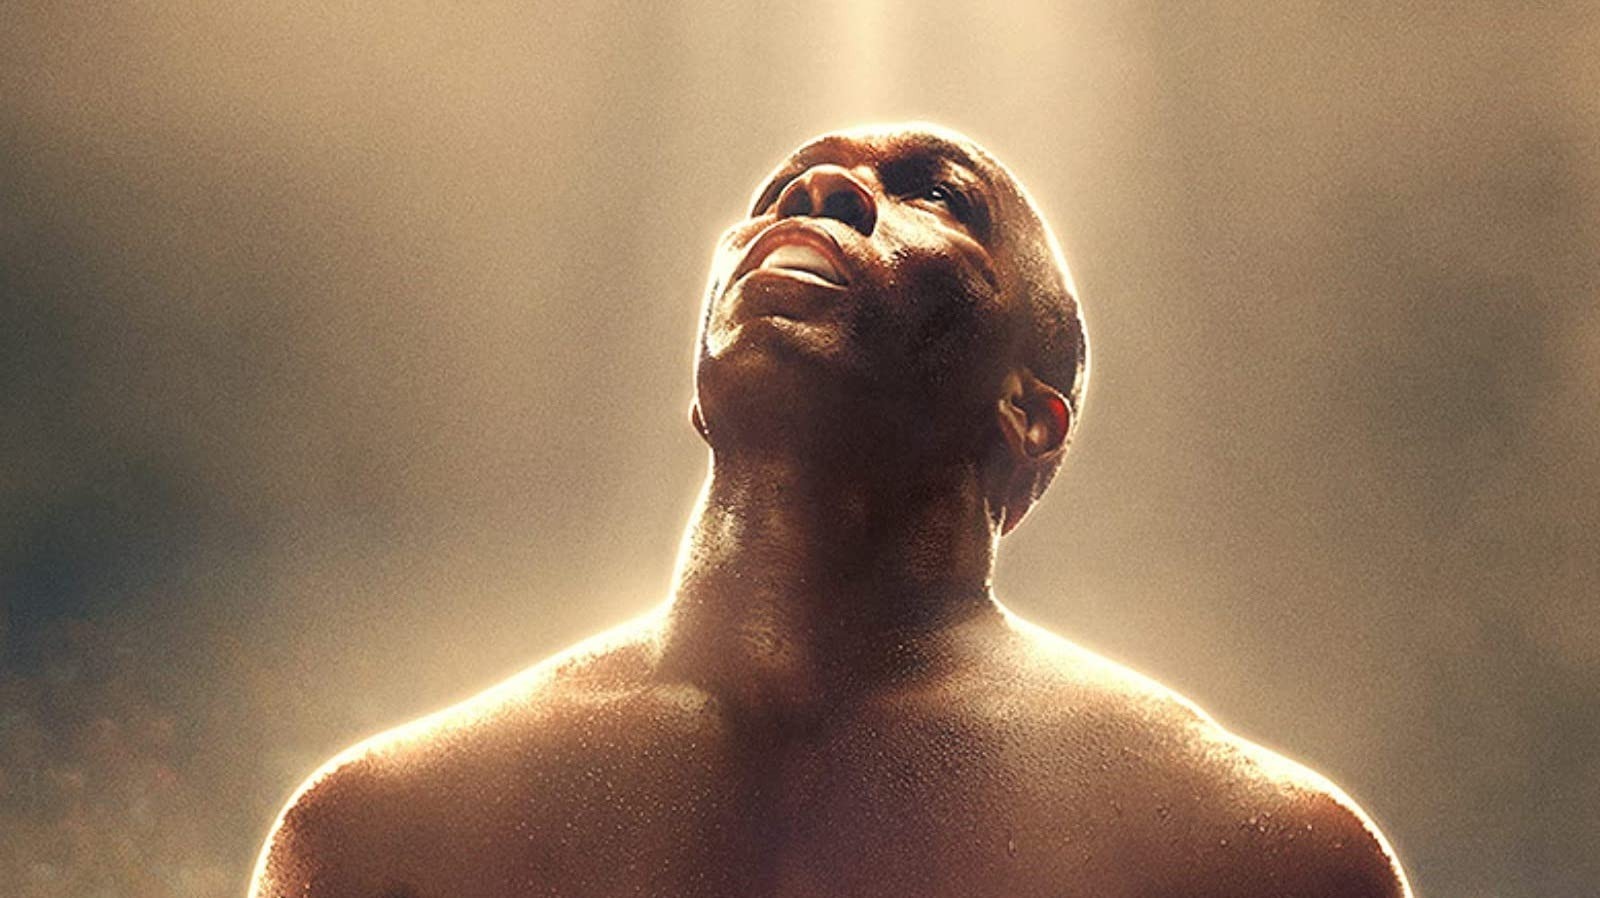 Big Foreman Trailer The Legendary Boxer Gets The Biopic Treatment